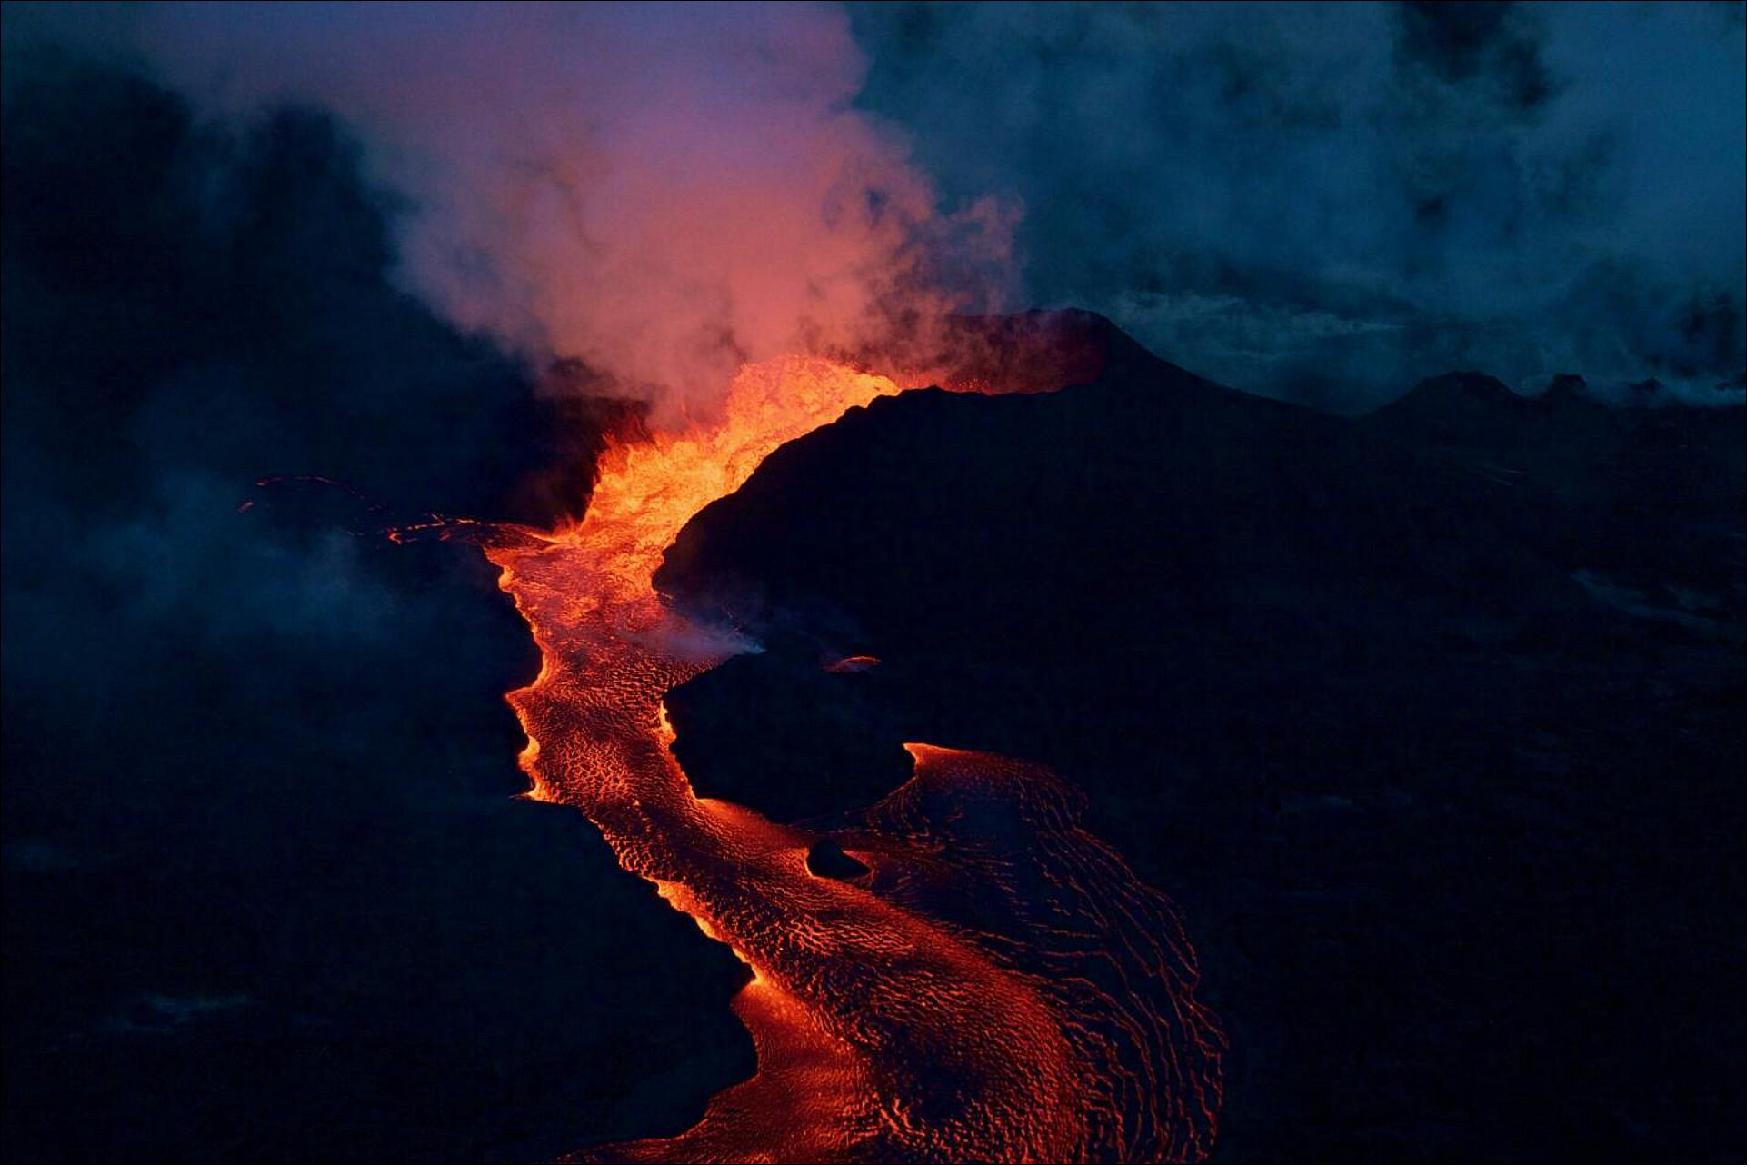 Figure 21: The eruption of Hawaii’s Kilauea volcano in 2018 was one of the most destructive in this volcano’s recorded history. Why this happened has remained a mystery until a paper published recently in Nature suggests that rainfall could have been the culprit (image credit: U.S. Geological Survey)